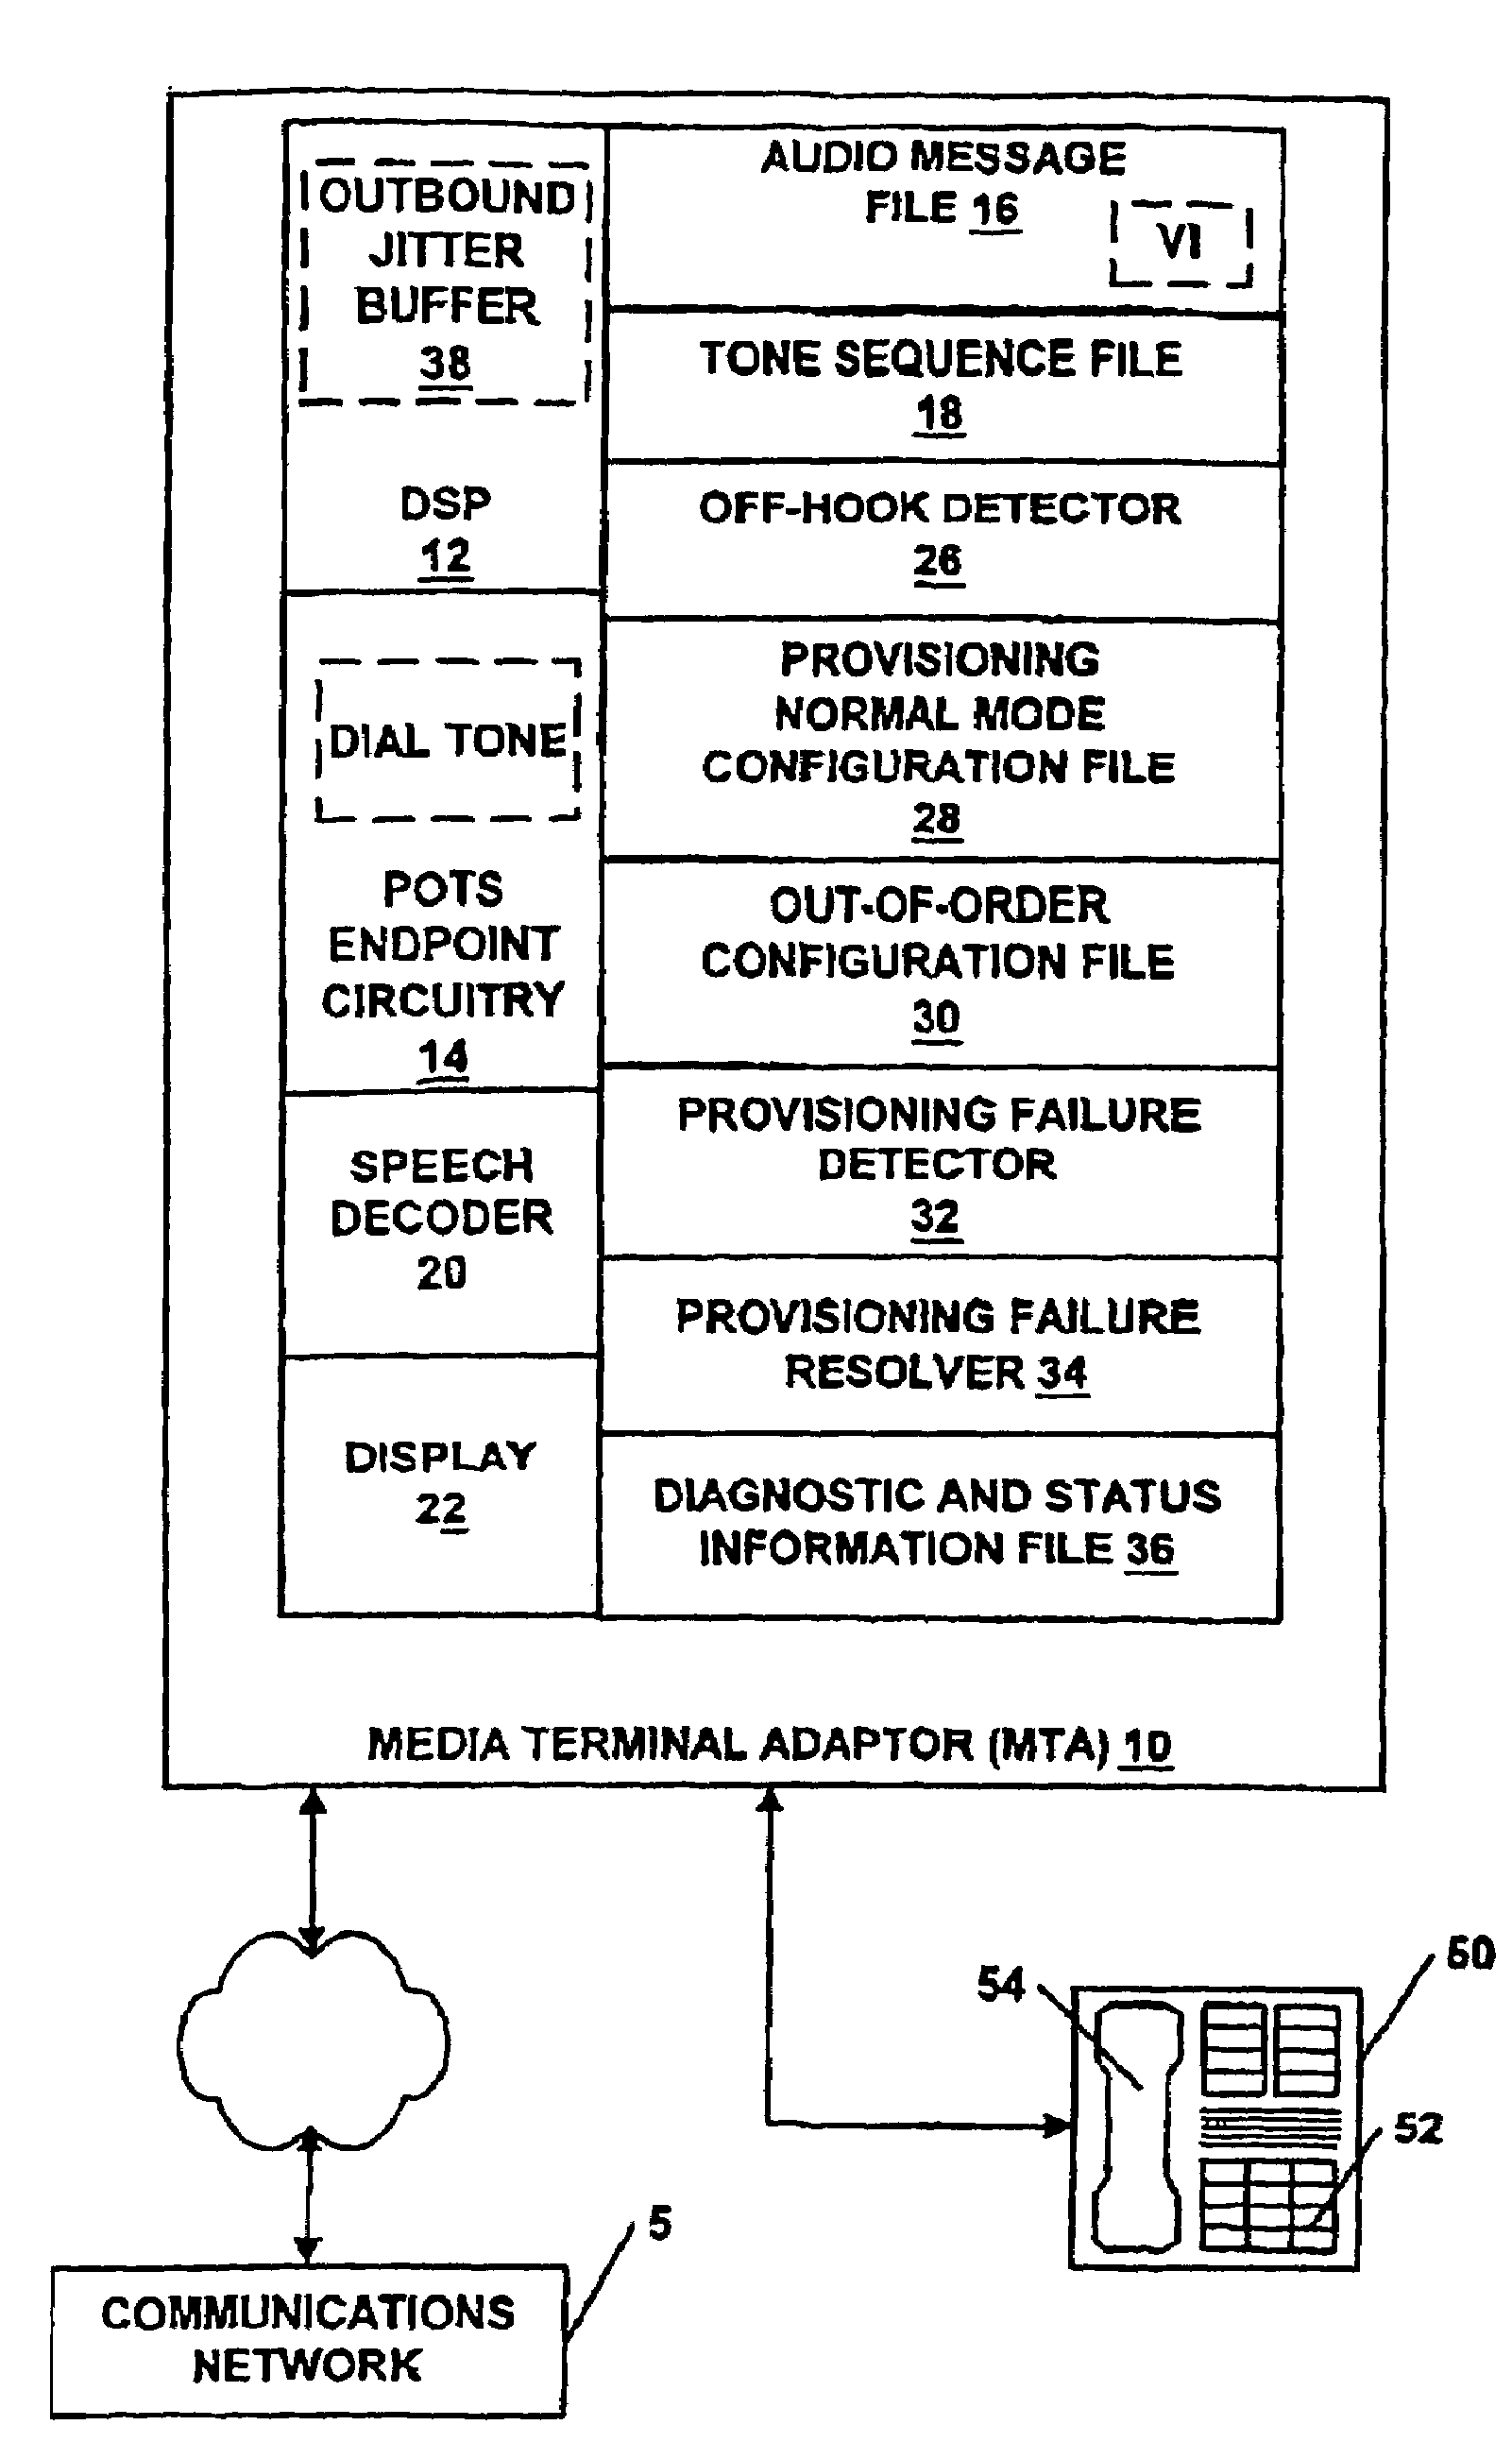 Method and apparatus for generating and playing diagnostic messages indicative of MTA provisioning status